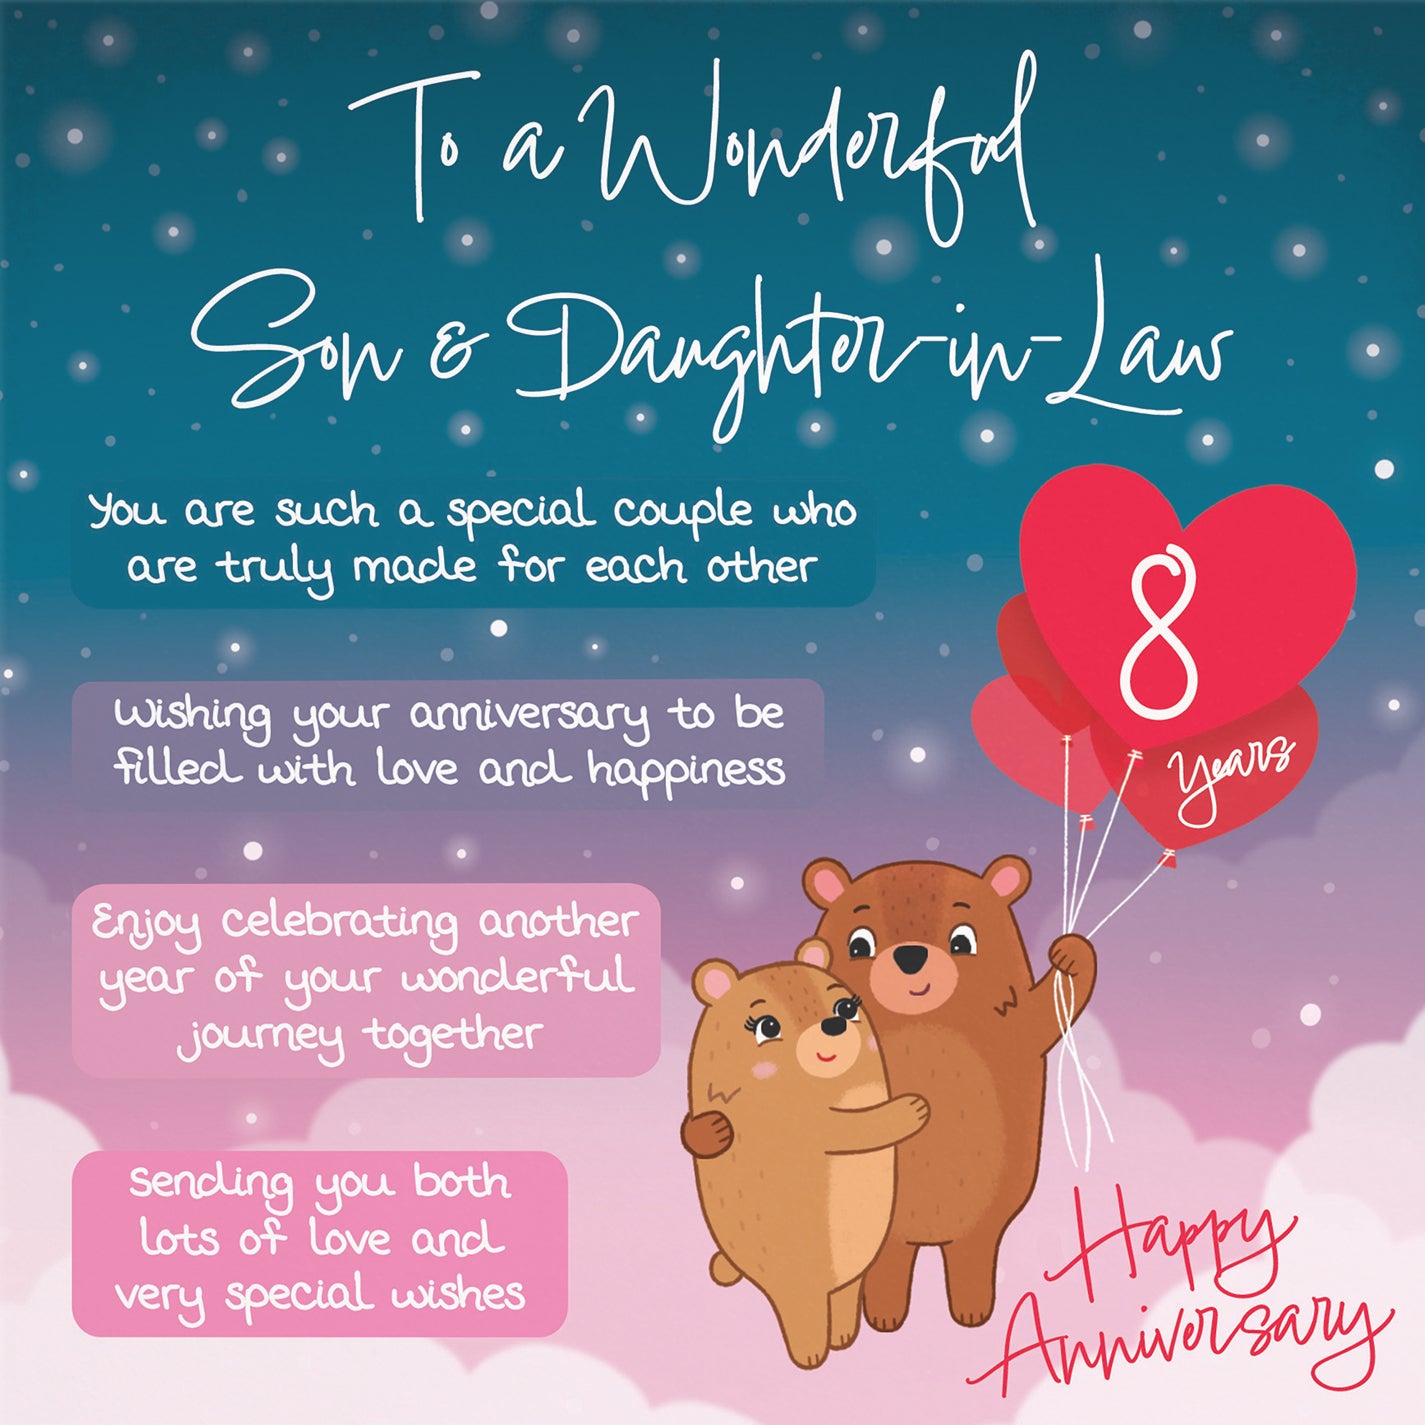 Son And Daughter In Law 8th Anniversary Card Starry Night Cute Bears